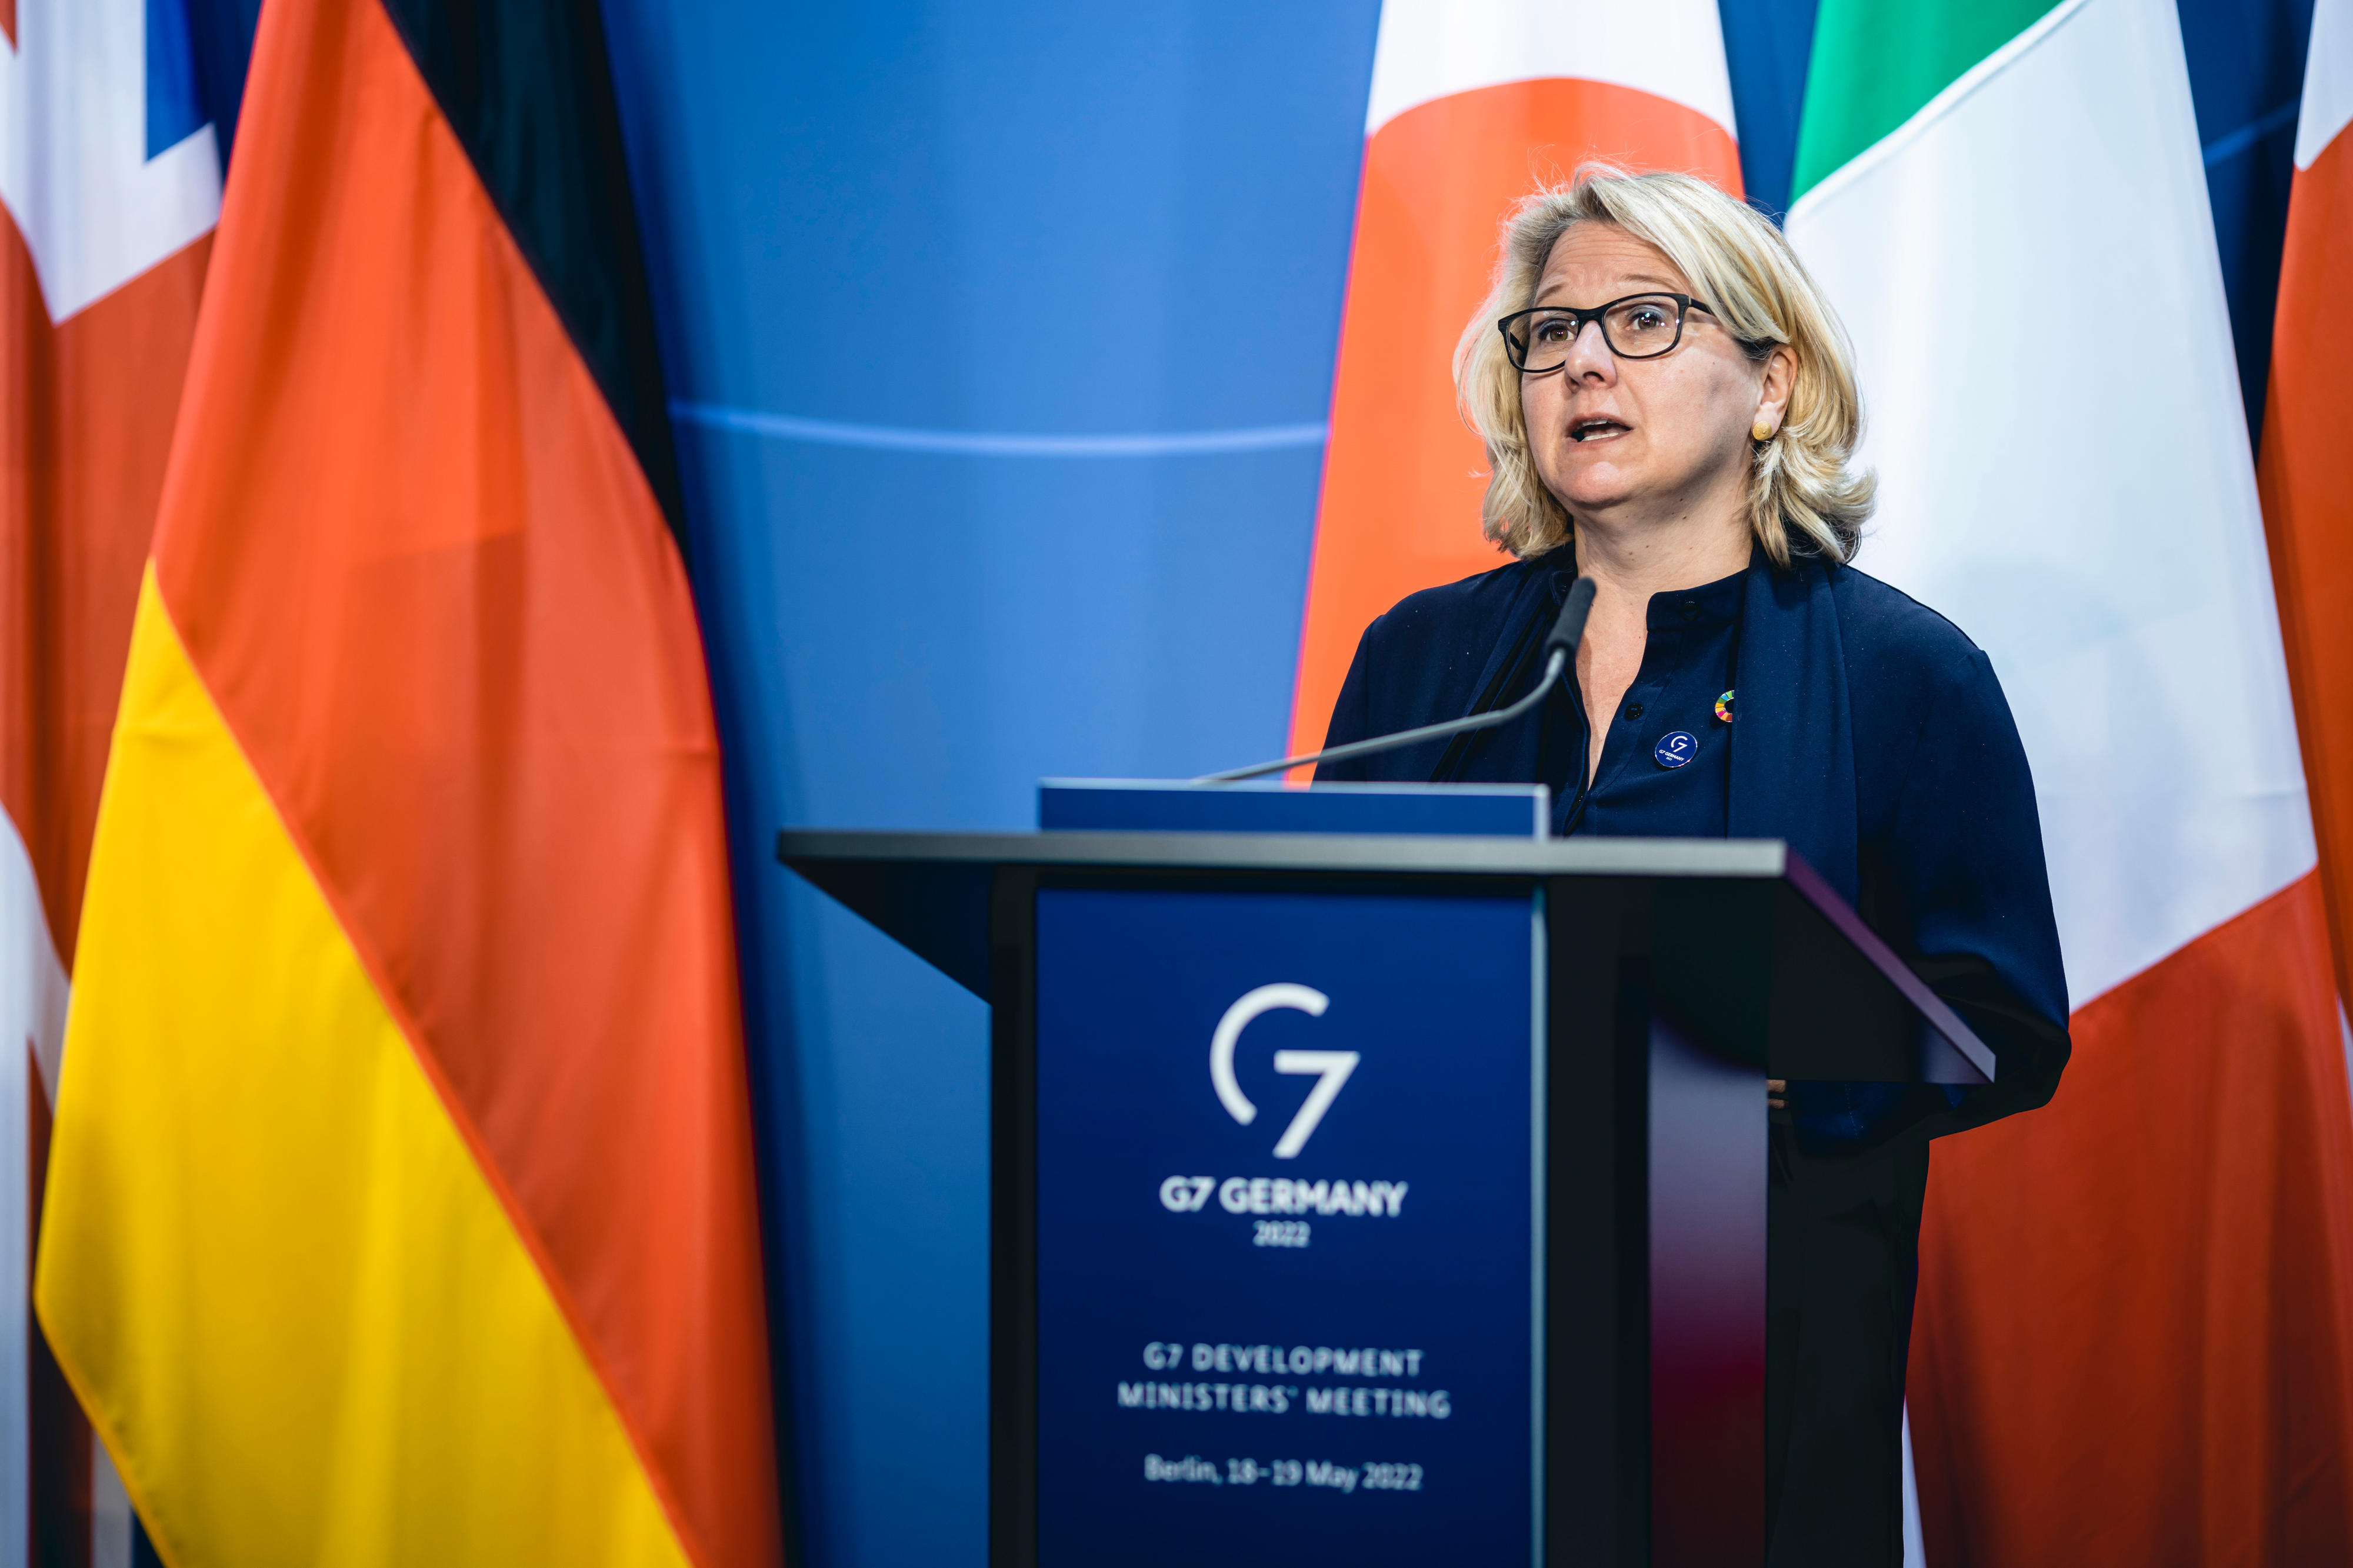 German Development Minister Svenja Schulze speaks at the opening press conference of the G7 meeting of development ministers in Berlin.